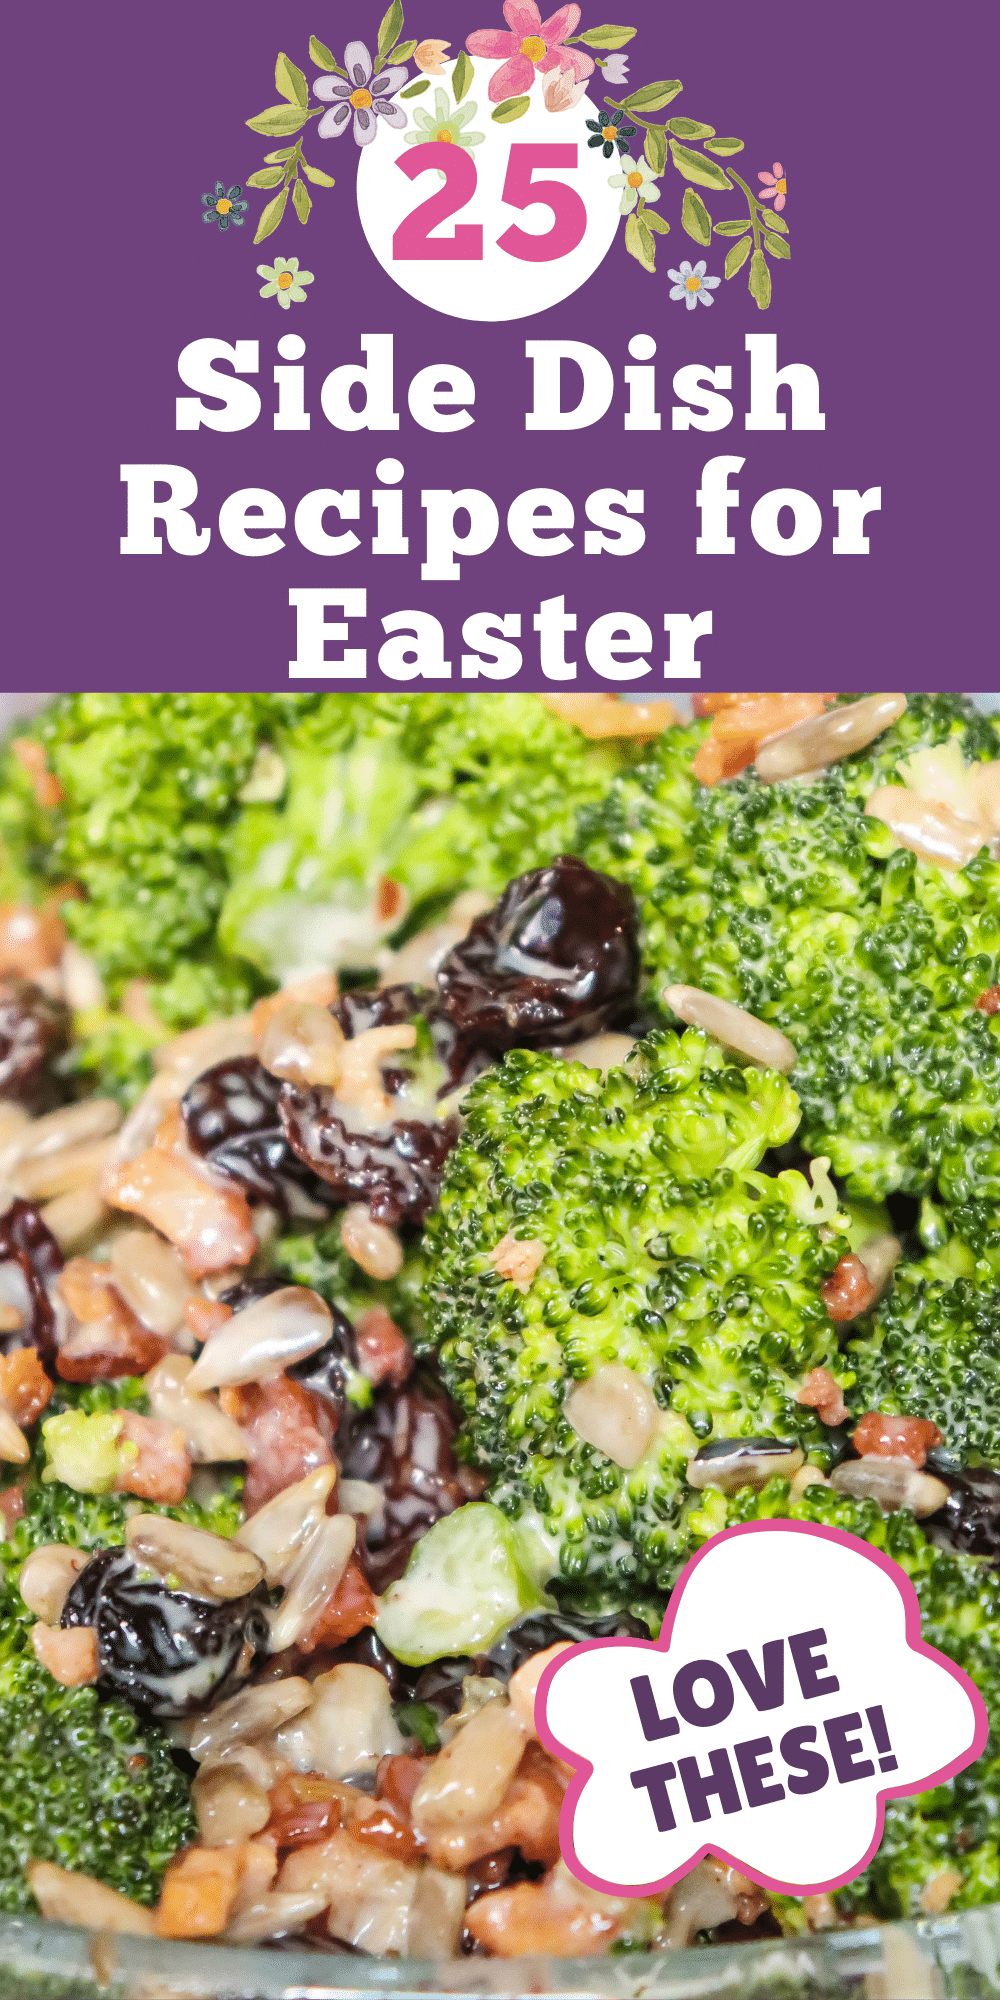 While we love a good ham recipes for Easter, the side dishes are our favorite part of this holiday meal! Looking for a old fashioned southern favorite or a lighter option to grace the Easter lunch table this year? Take a look at these 25 fantastic side dish recipes for Easter that are ready to hop their way onto your Easter table!  via @bigbearswife